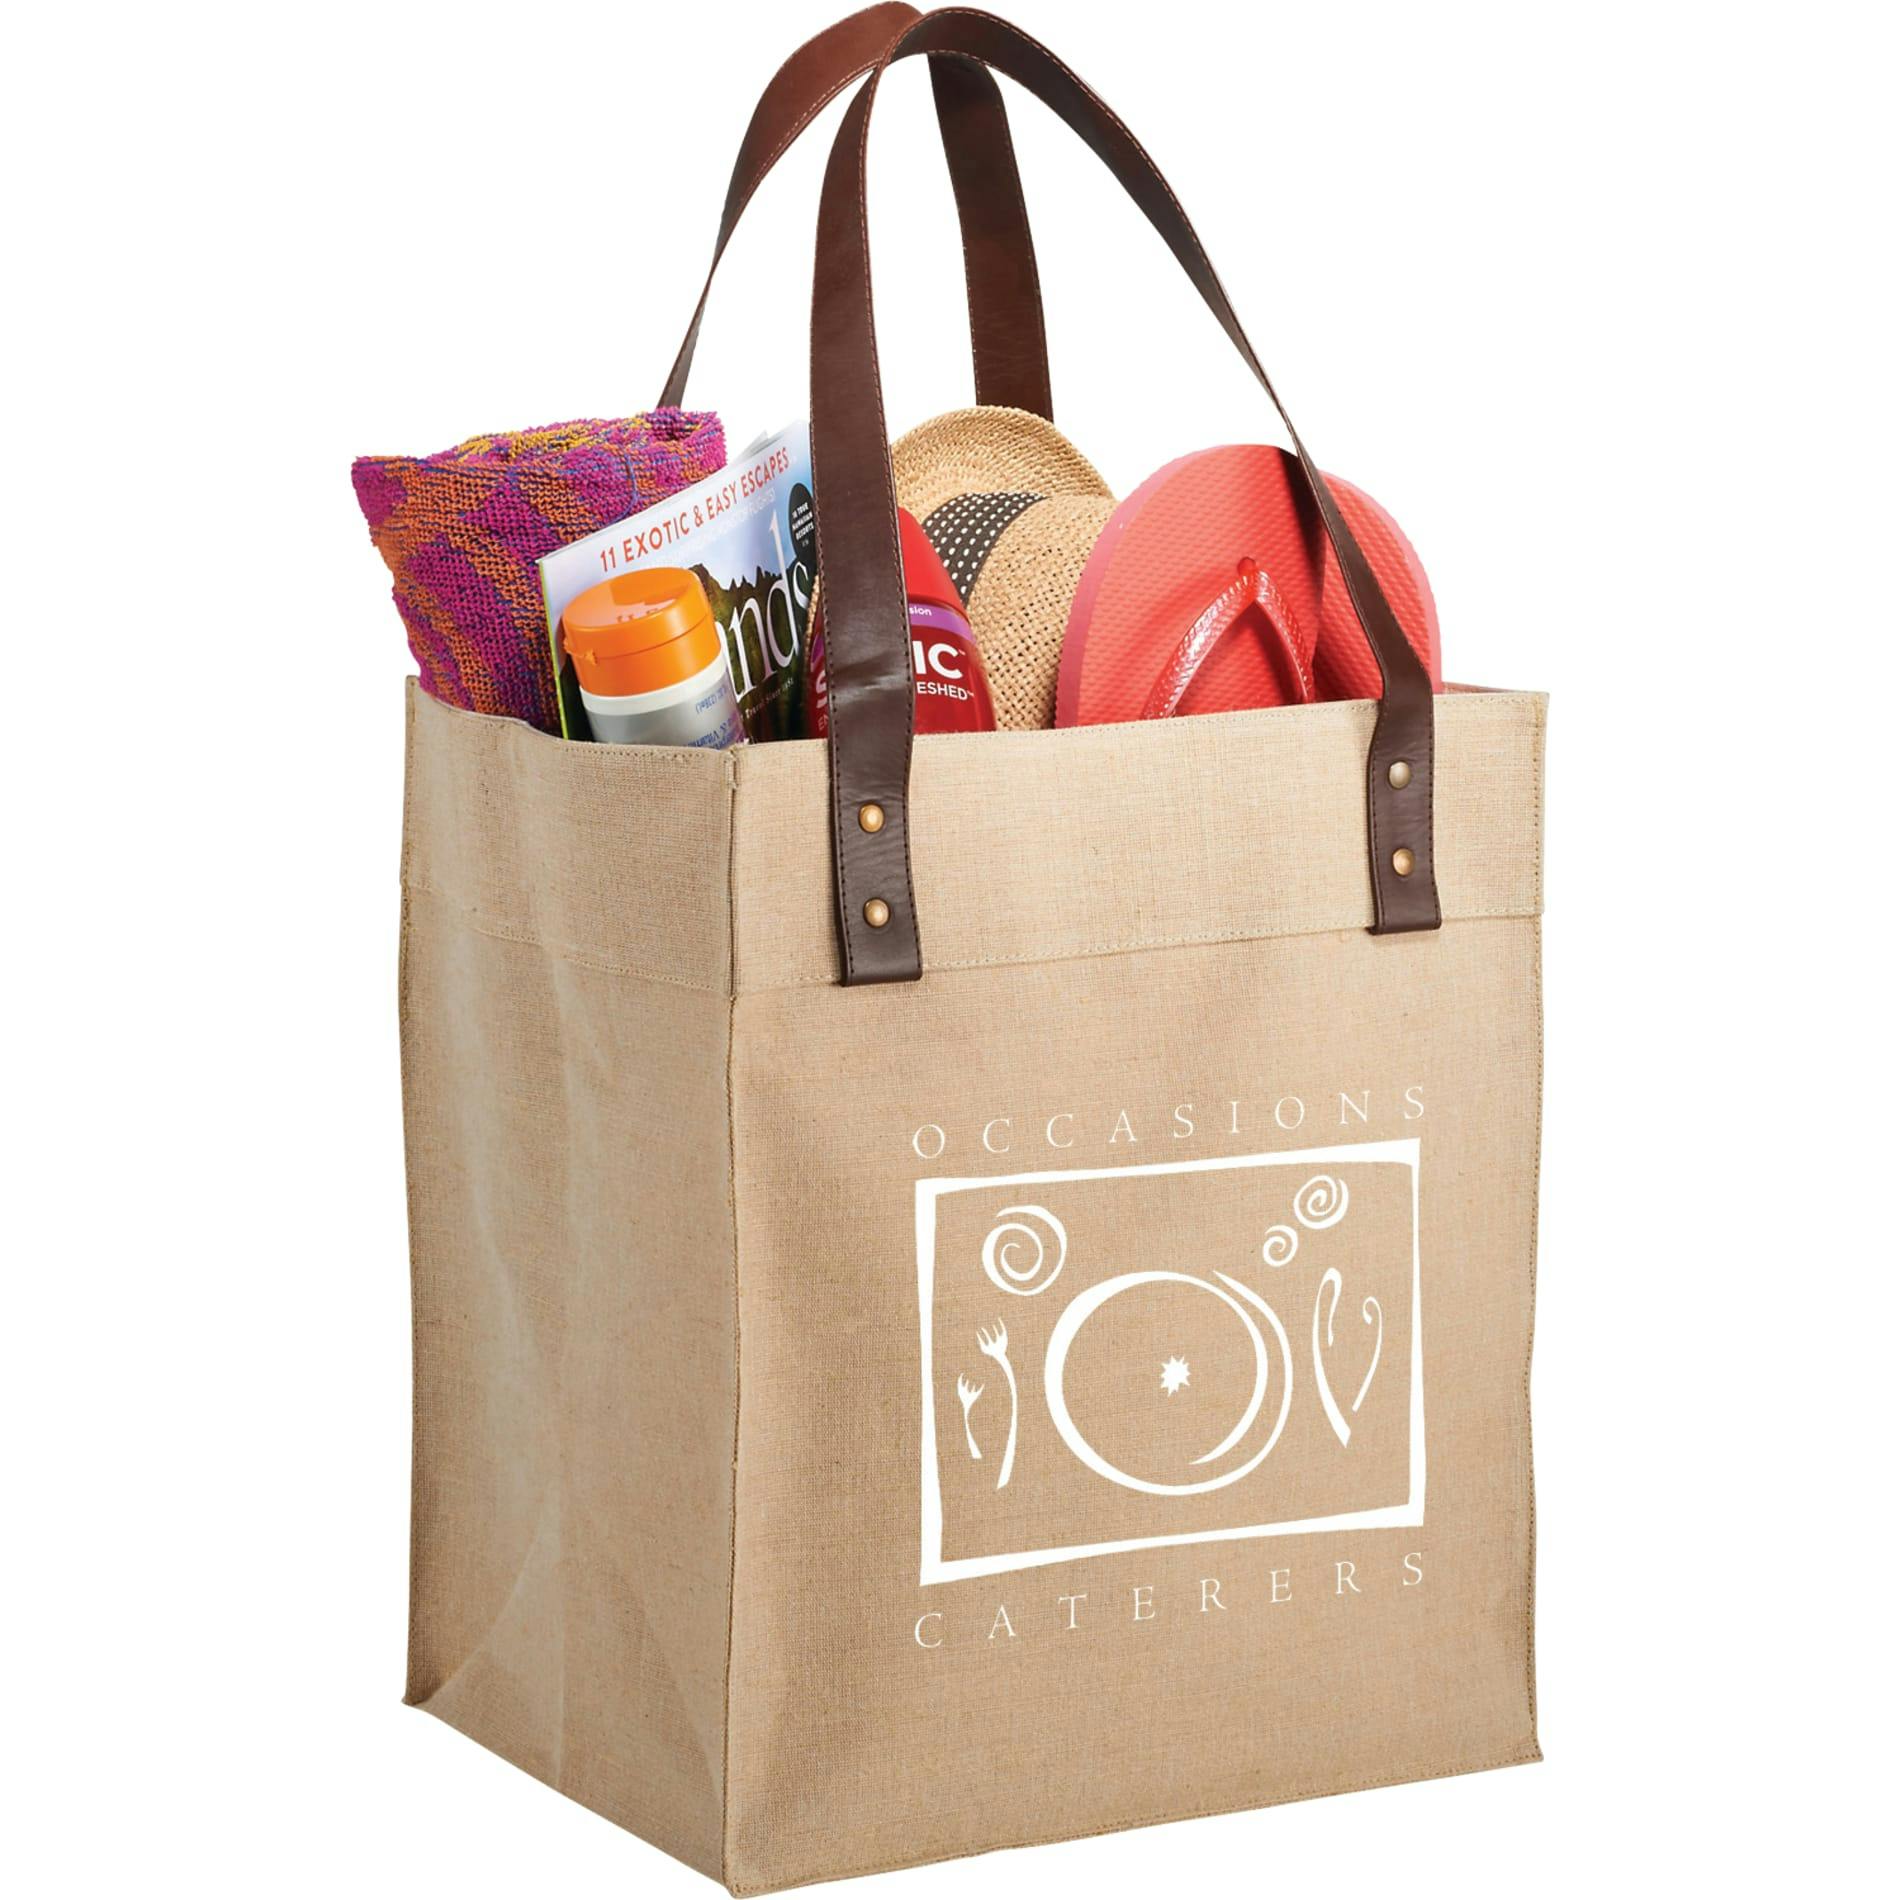 Westover Premium Grocery Tote - additional Image 1